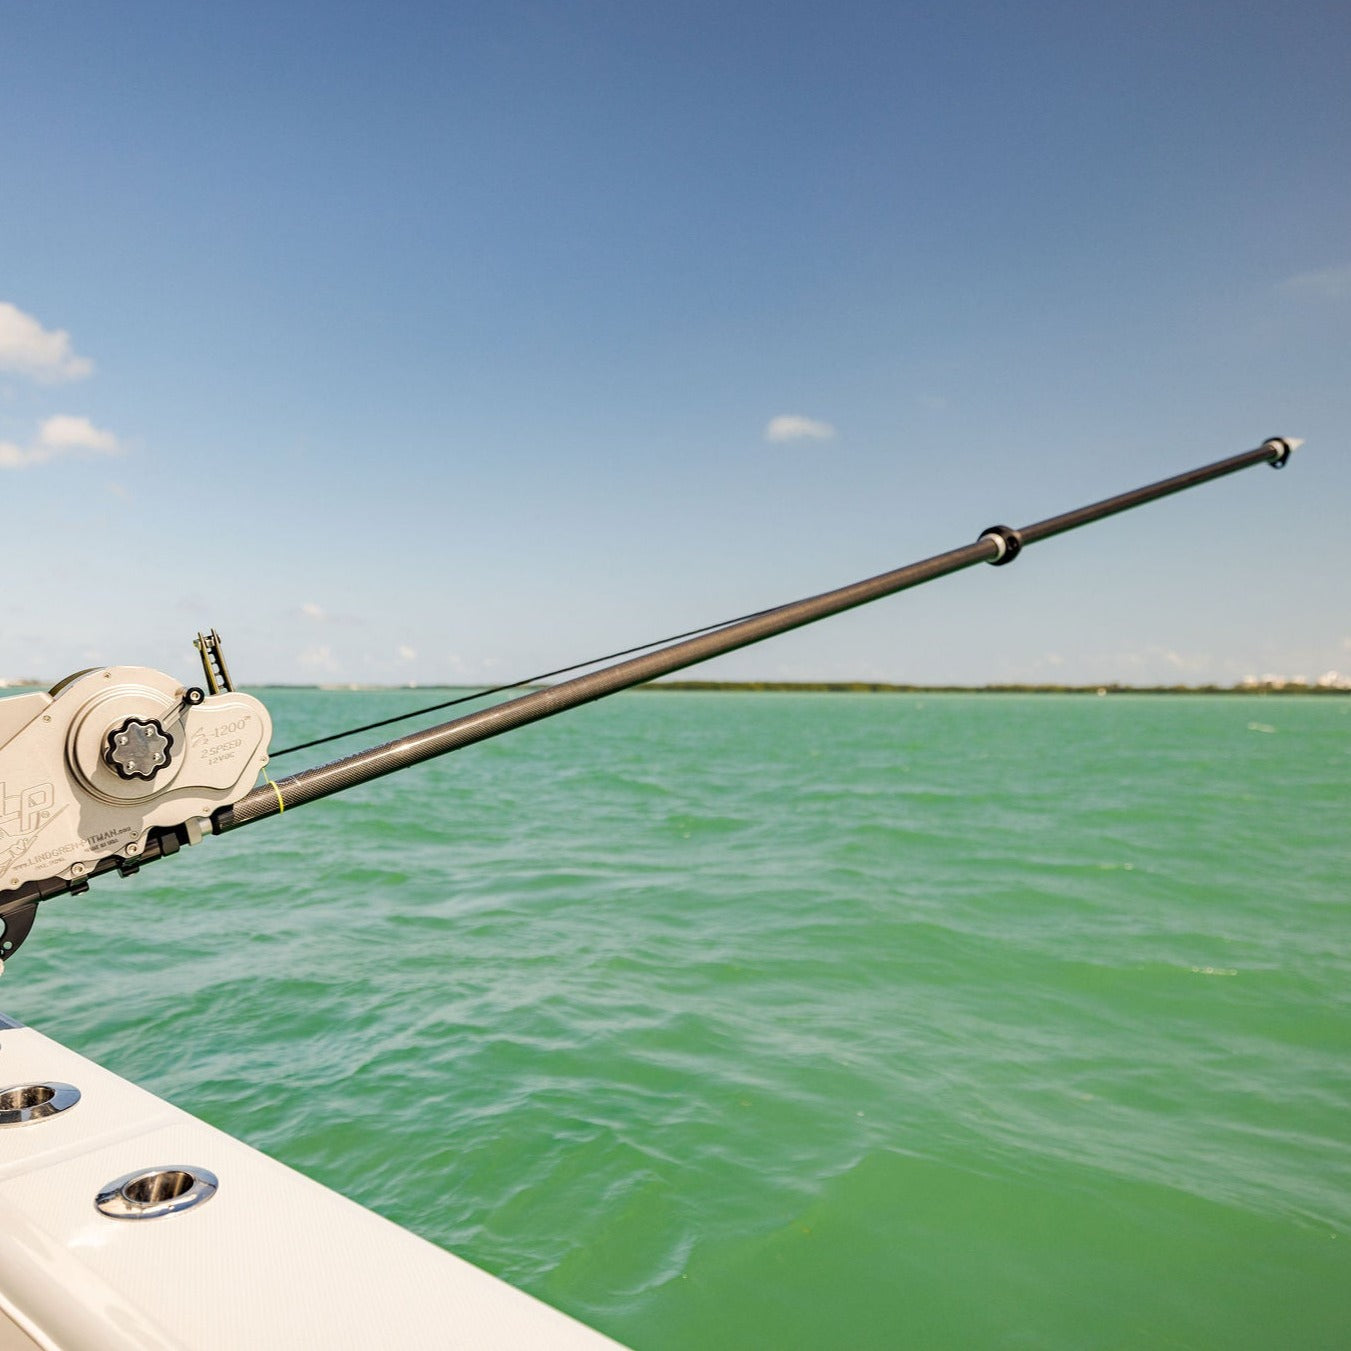 Anyone tie off thier rods and reels when trolling? - The Hull